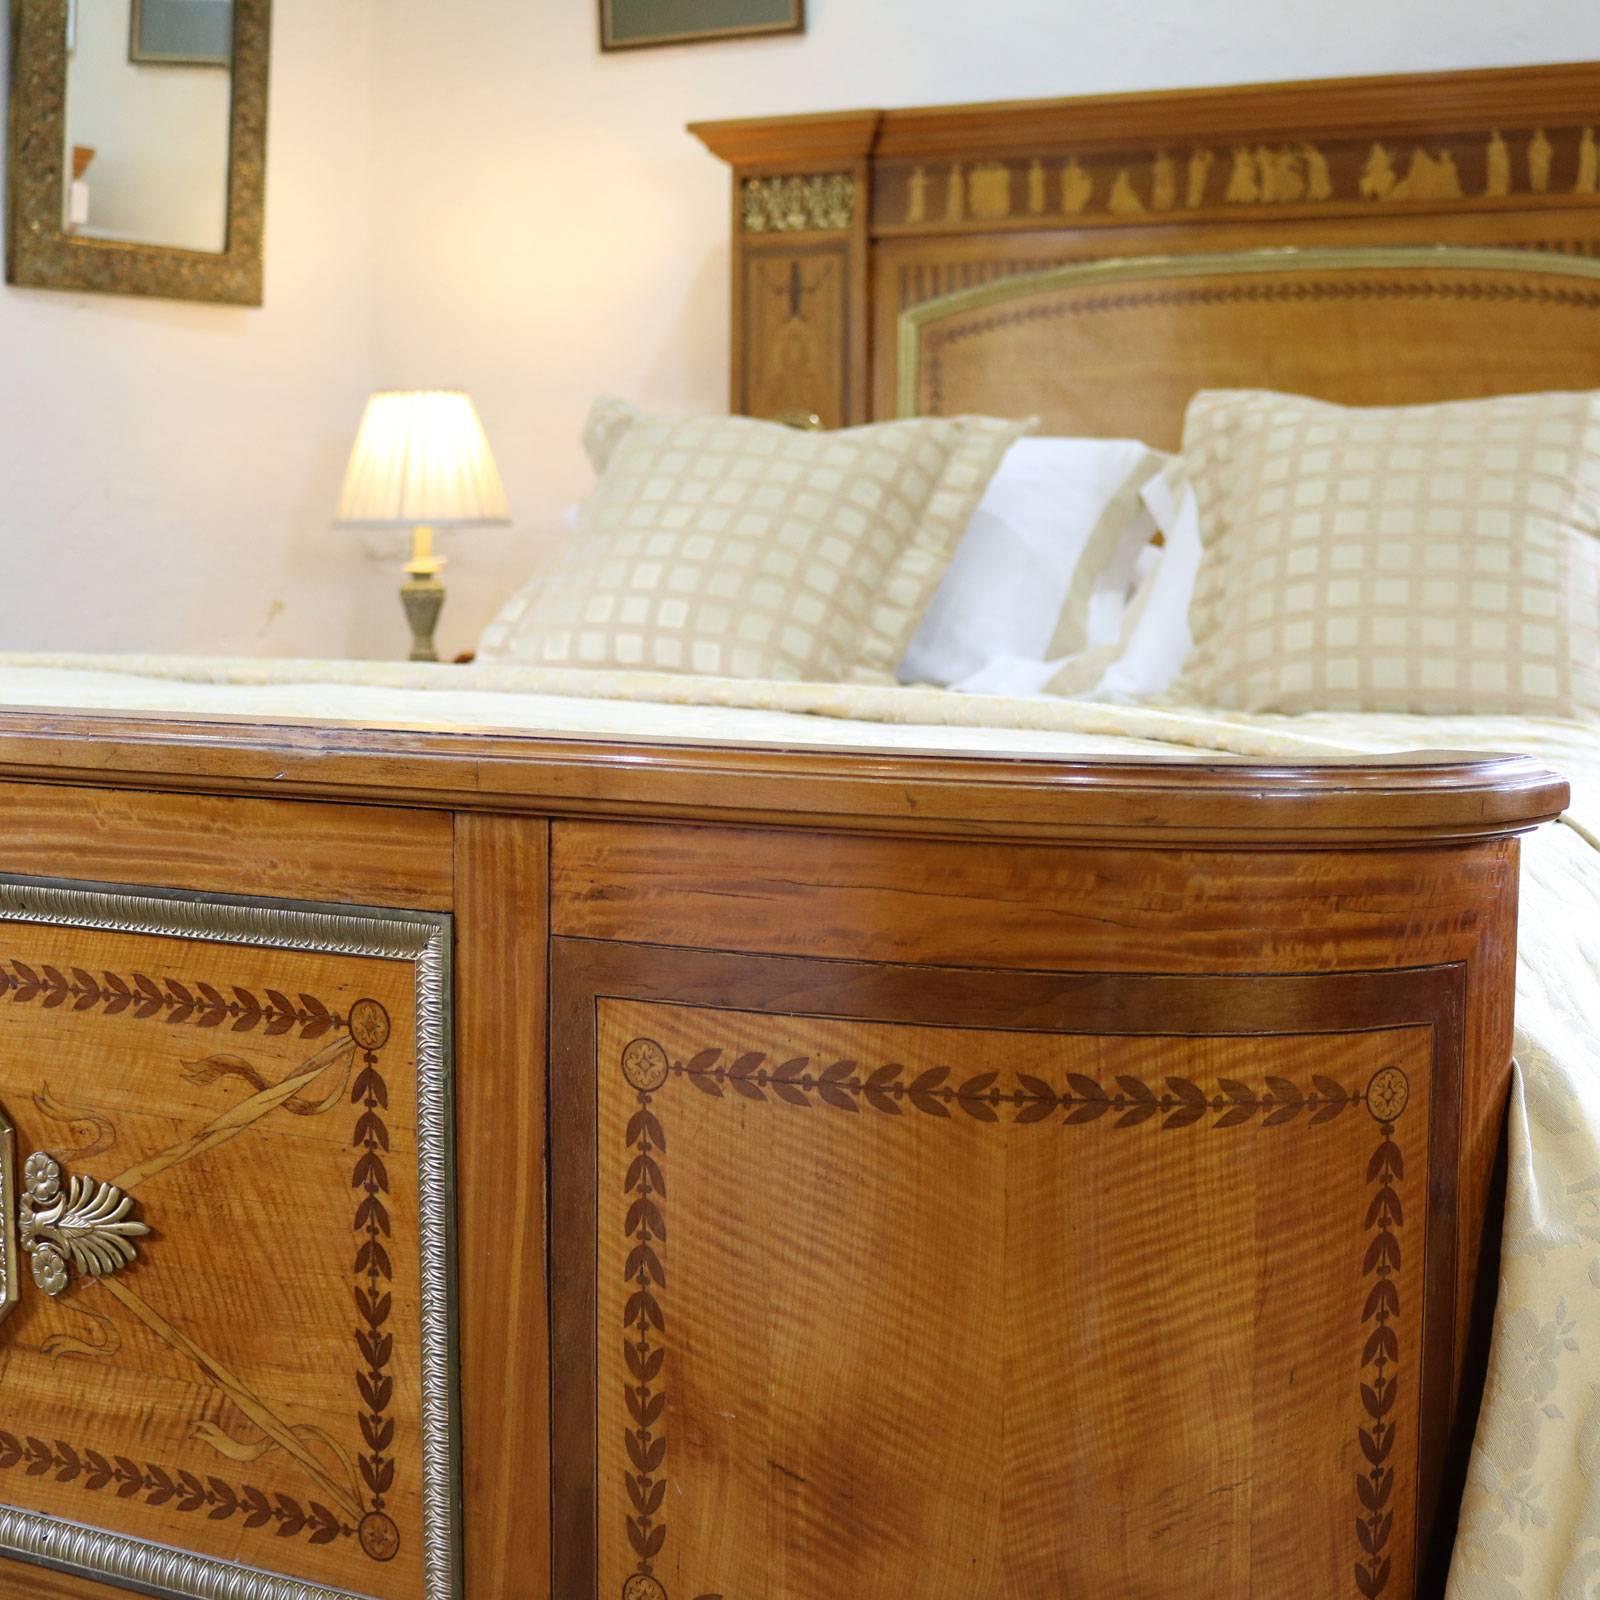 A fabulous Empire style bed with superb Greco-Roman inspired inlay work. The framework is mahogany with fruitwood inlay and ormolu decoration.

The price is for the bedstead alone, the base, mattress and bedding are extra and can be provided by